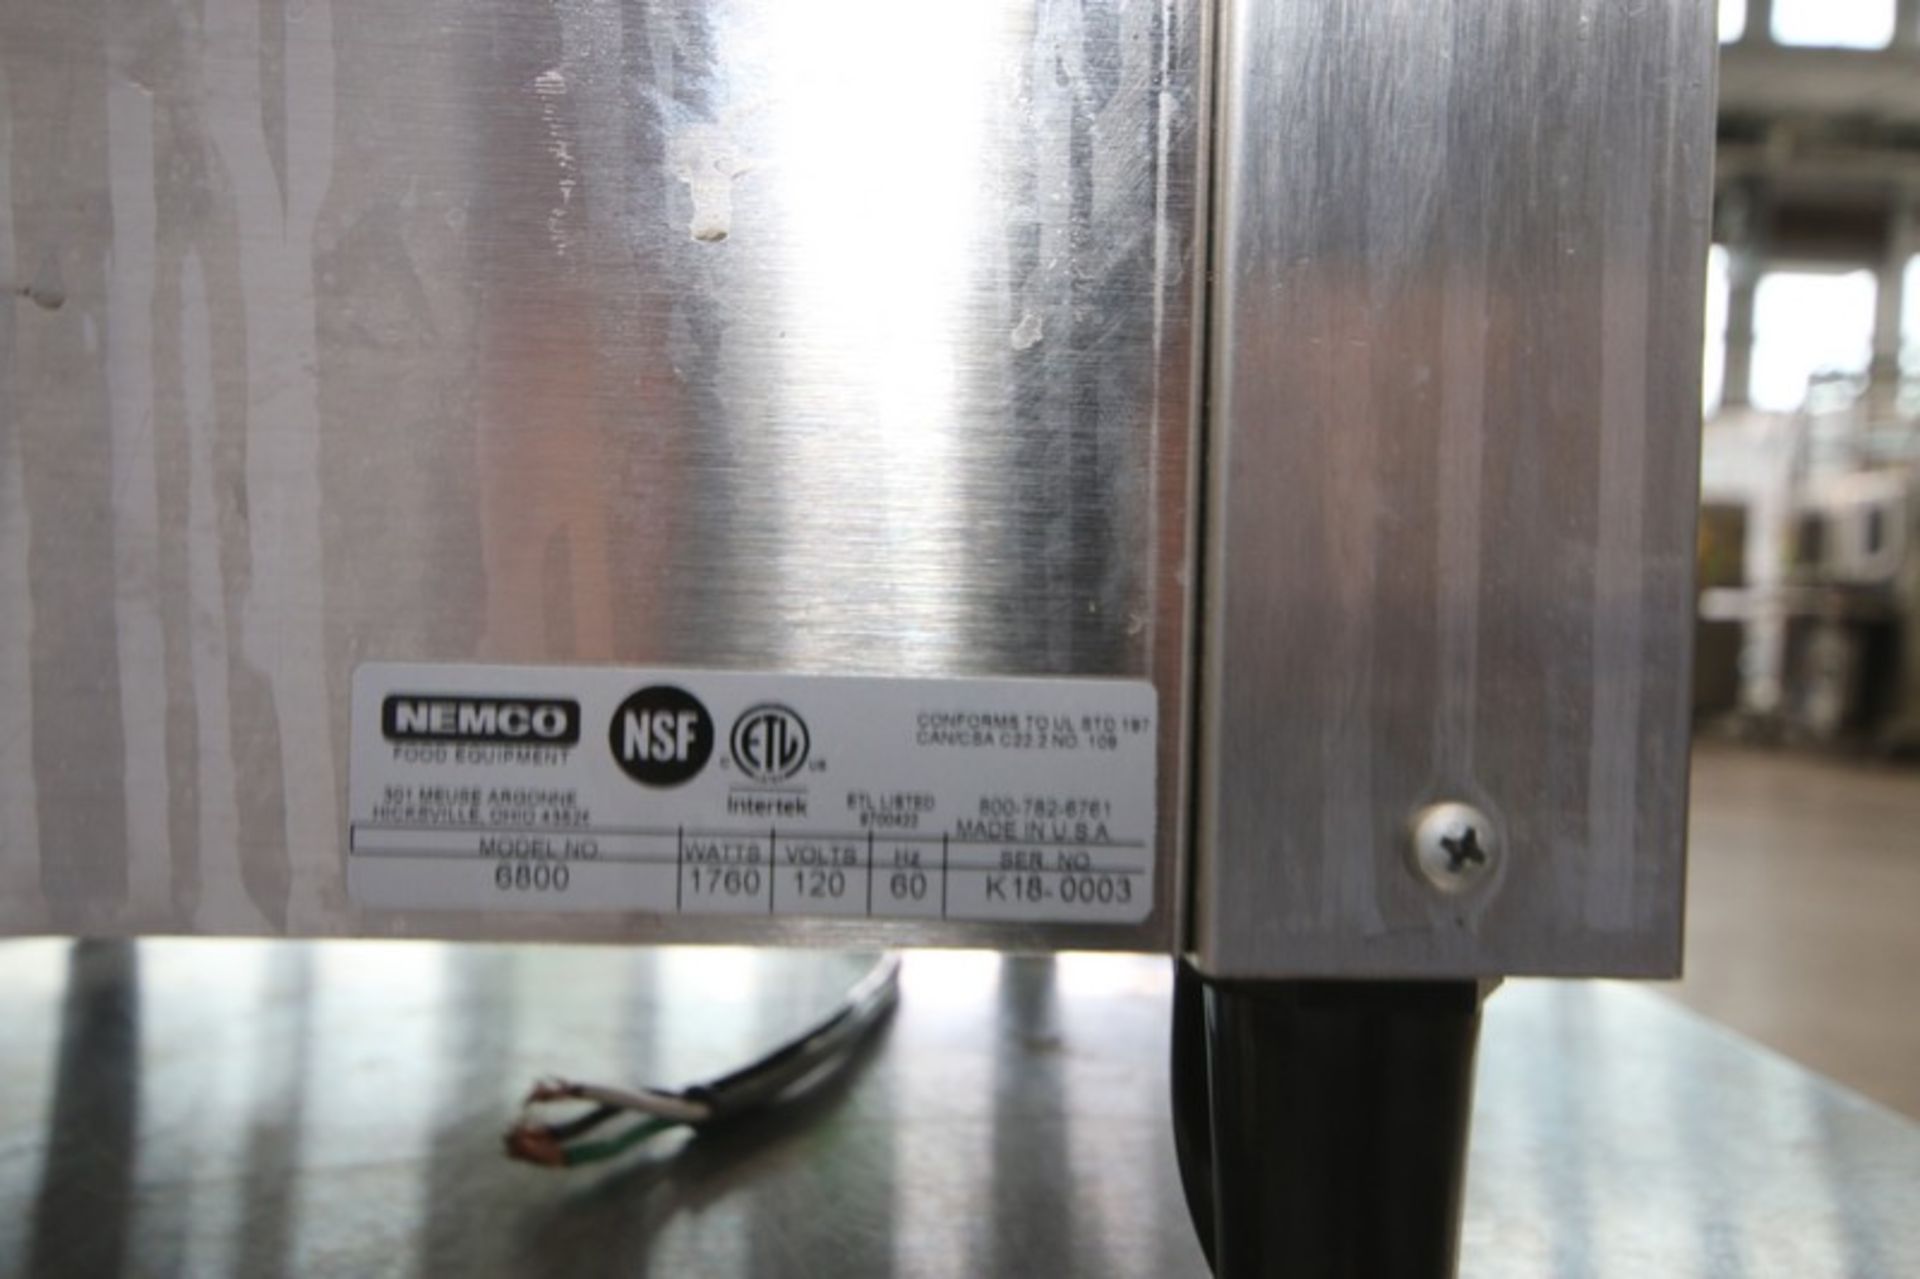 Nemco Flo-Thru Toaster, M/N 6800, S/N K18-0003, with Power Cord (INV#83111)(Located @ the MDG - Image 4 of 4